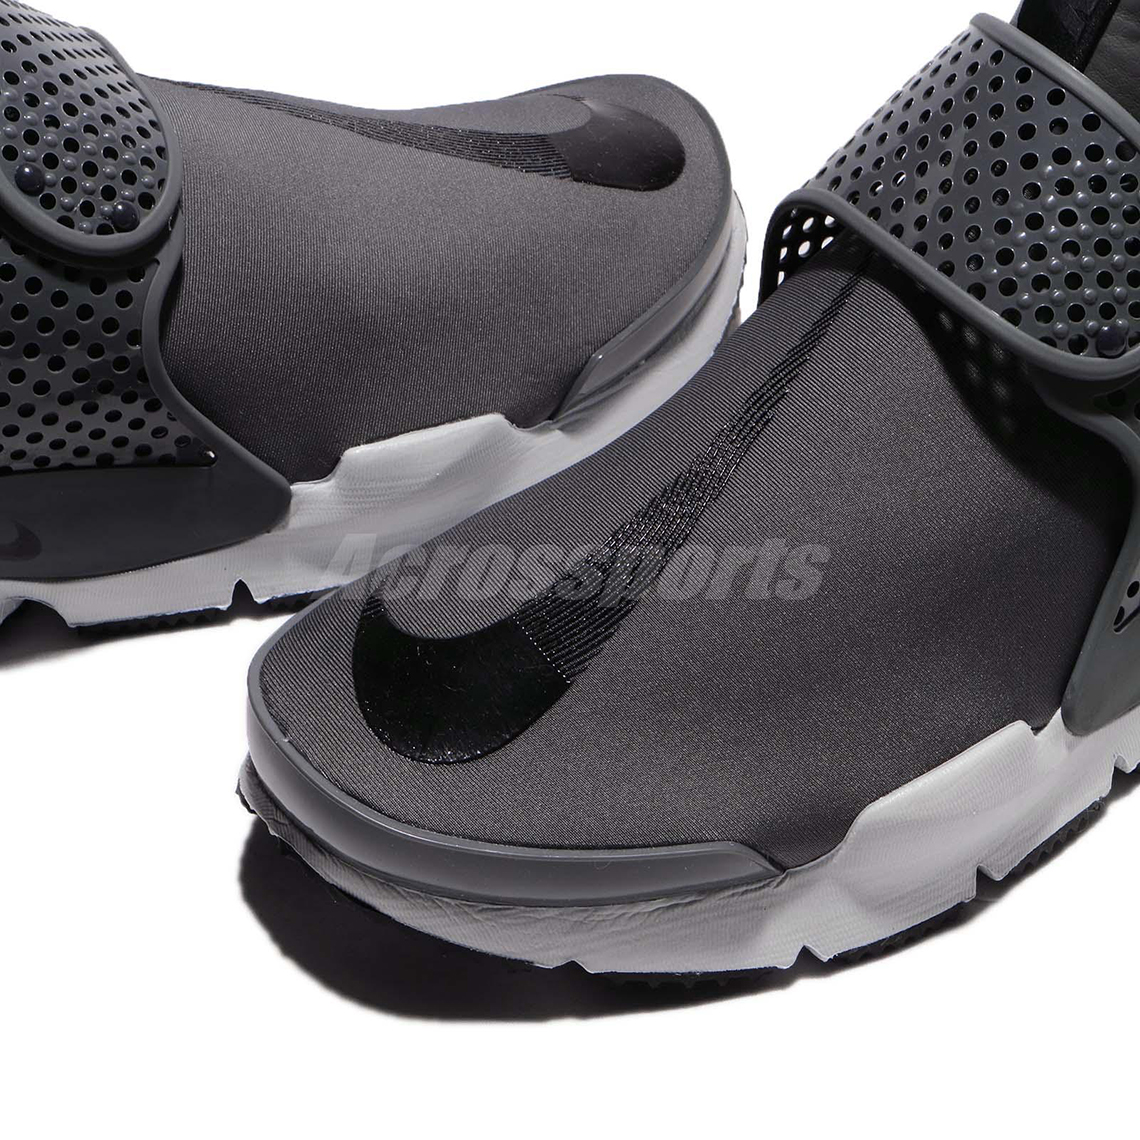 Nike Sock Dart Mid Anthracite 924454 003 Available Now 8